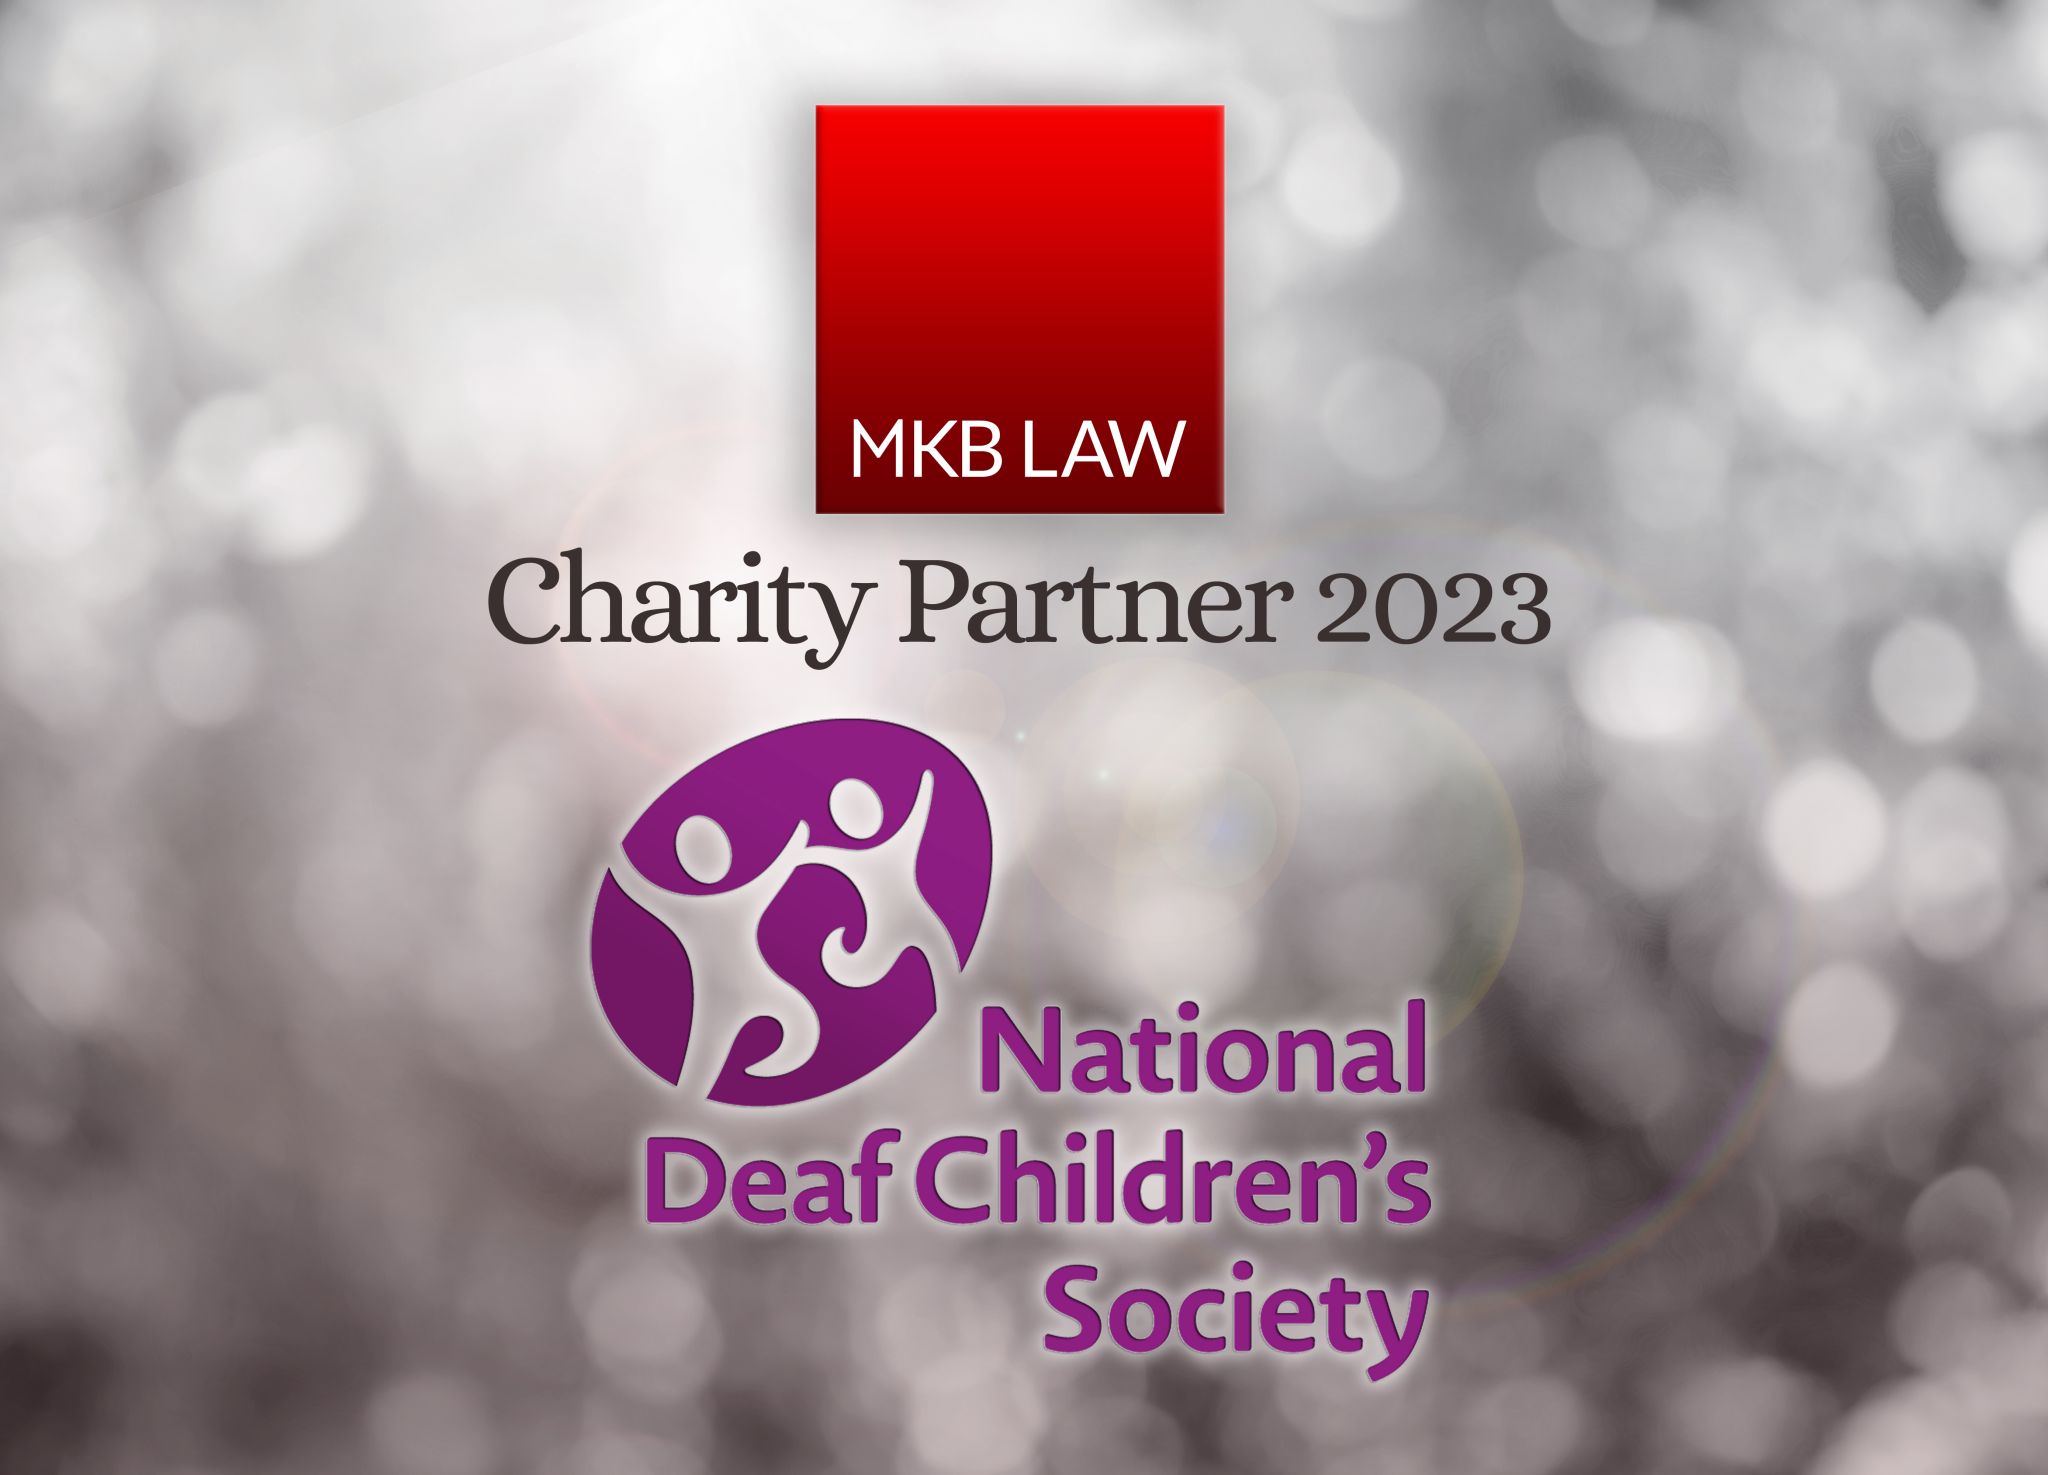 MKB Law partners with National Deaf Children's Society